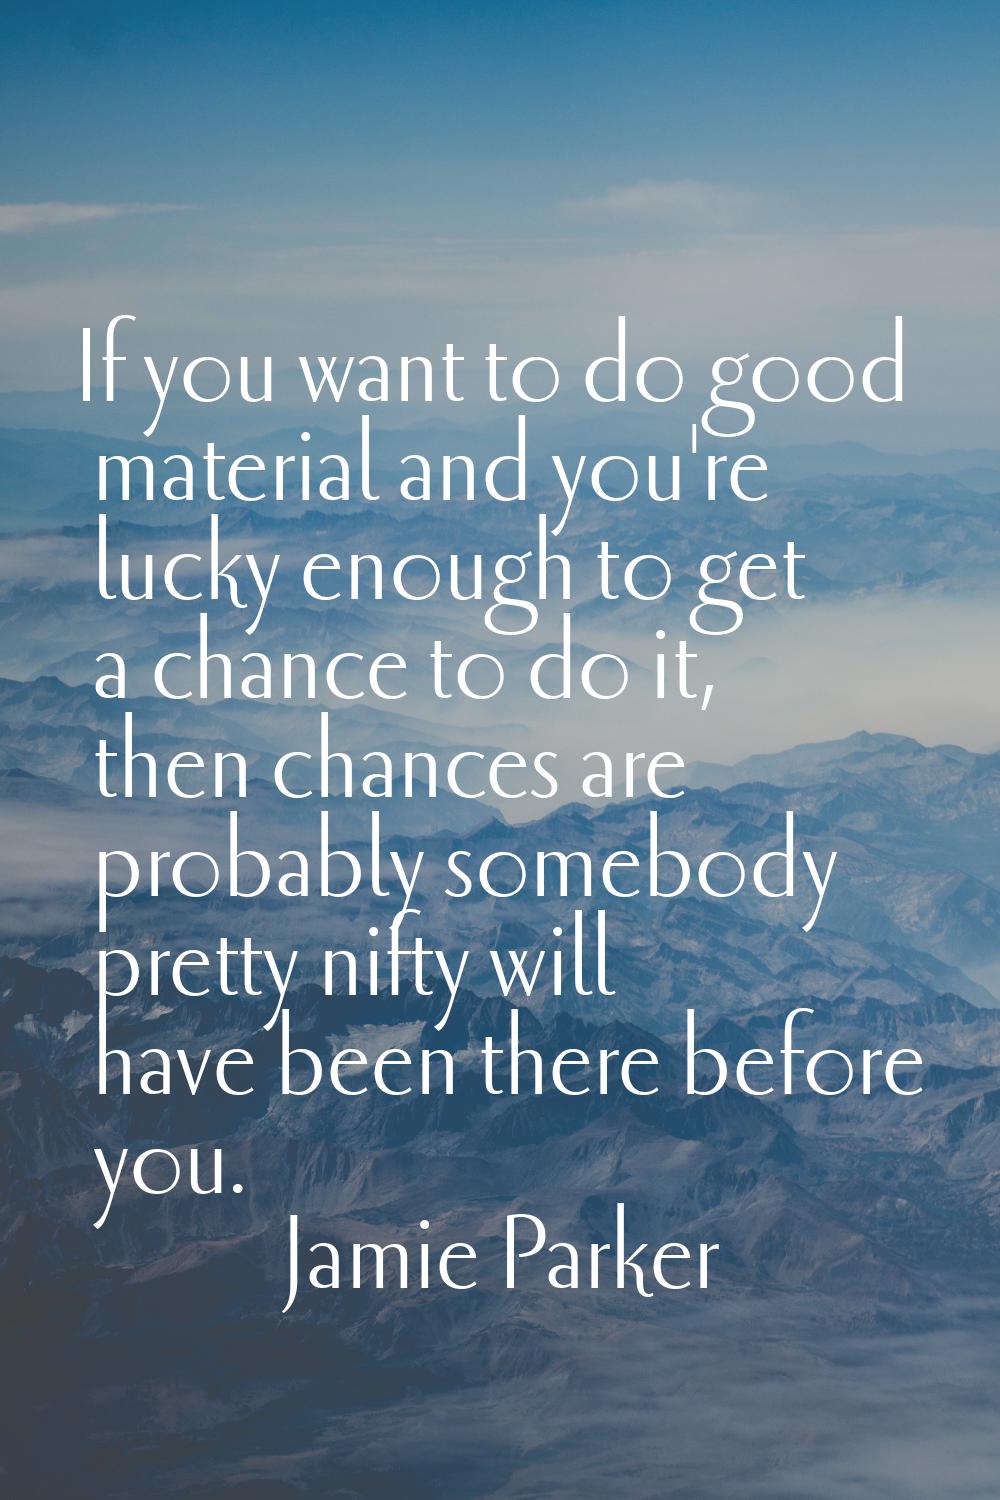 If you want to do good material and you're lucky enough to get a chance to do it, then chances are 